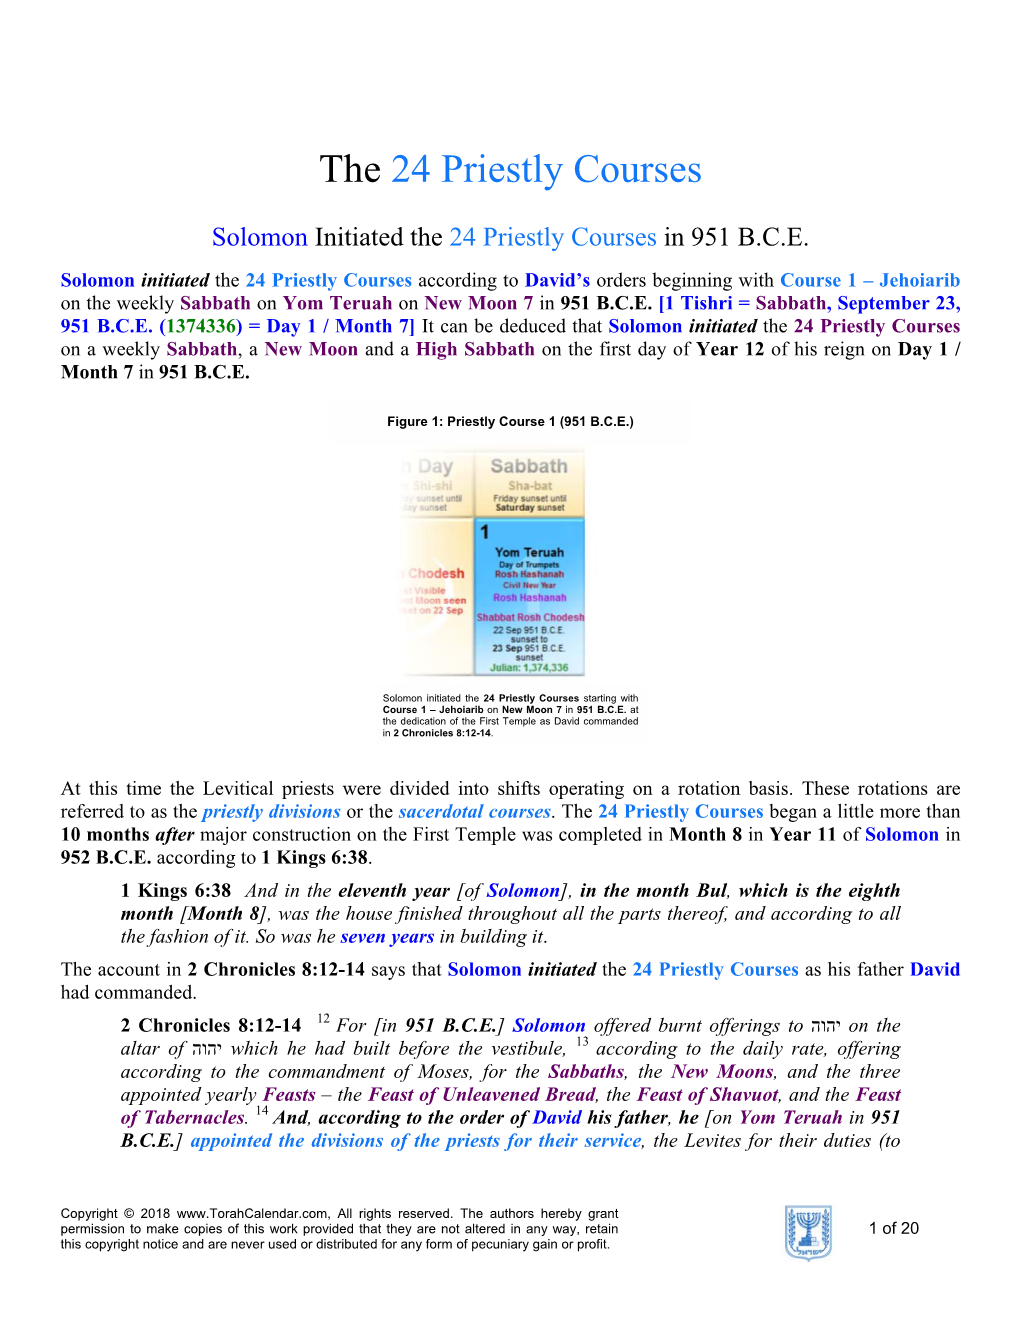 The 24 Priestly Courses